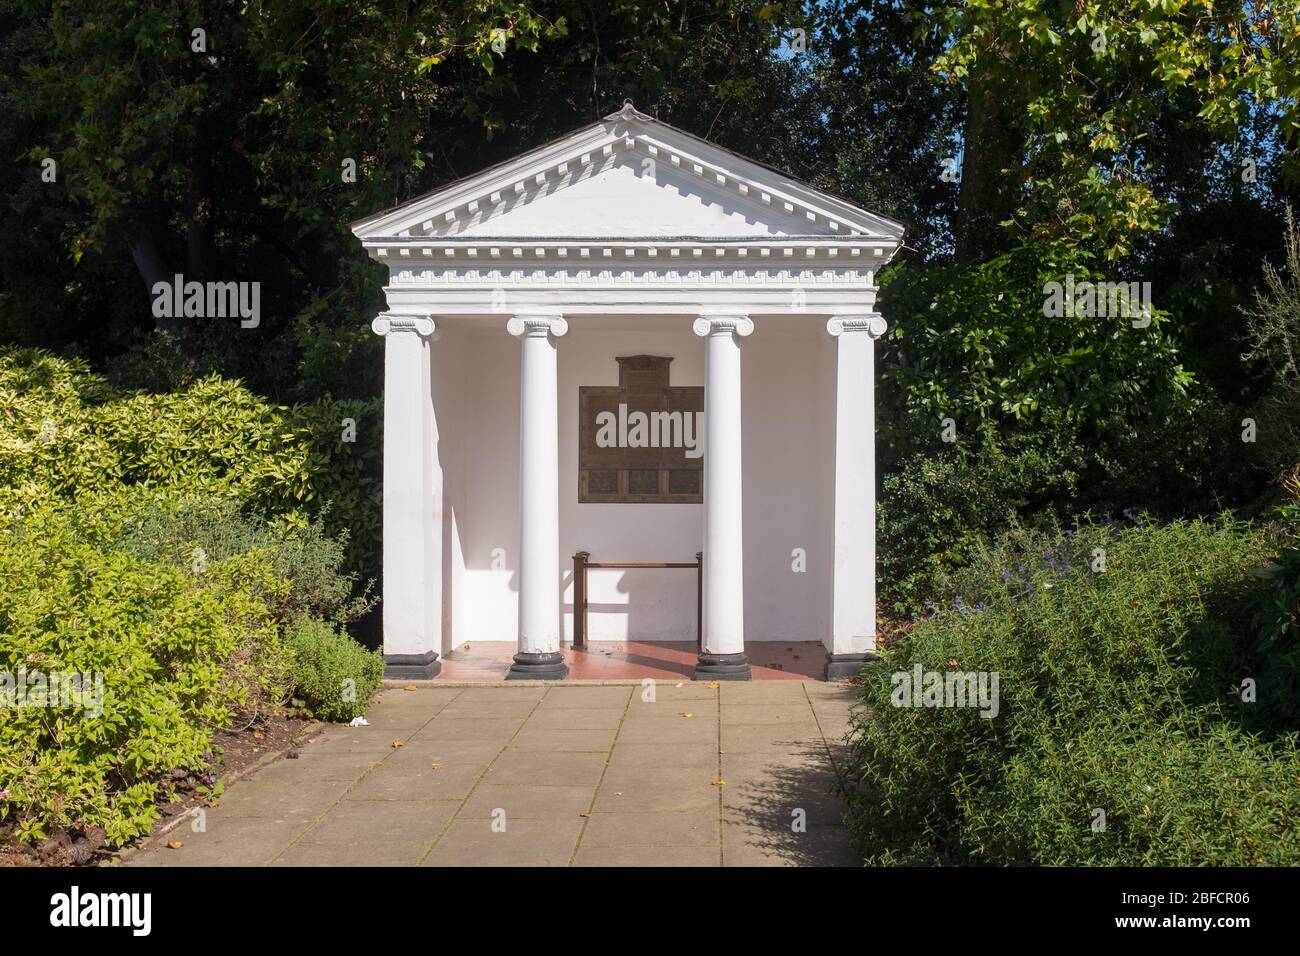 Temple of Arethusa, Royal Botanical Gardens, Kew, London. William Chambers Architect. Inside is a  memorial to the Kew Guild Members and Royal Botanic Stock Photo